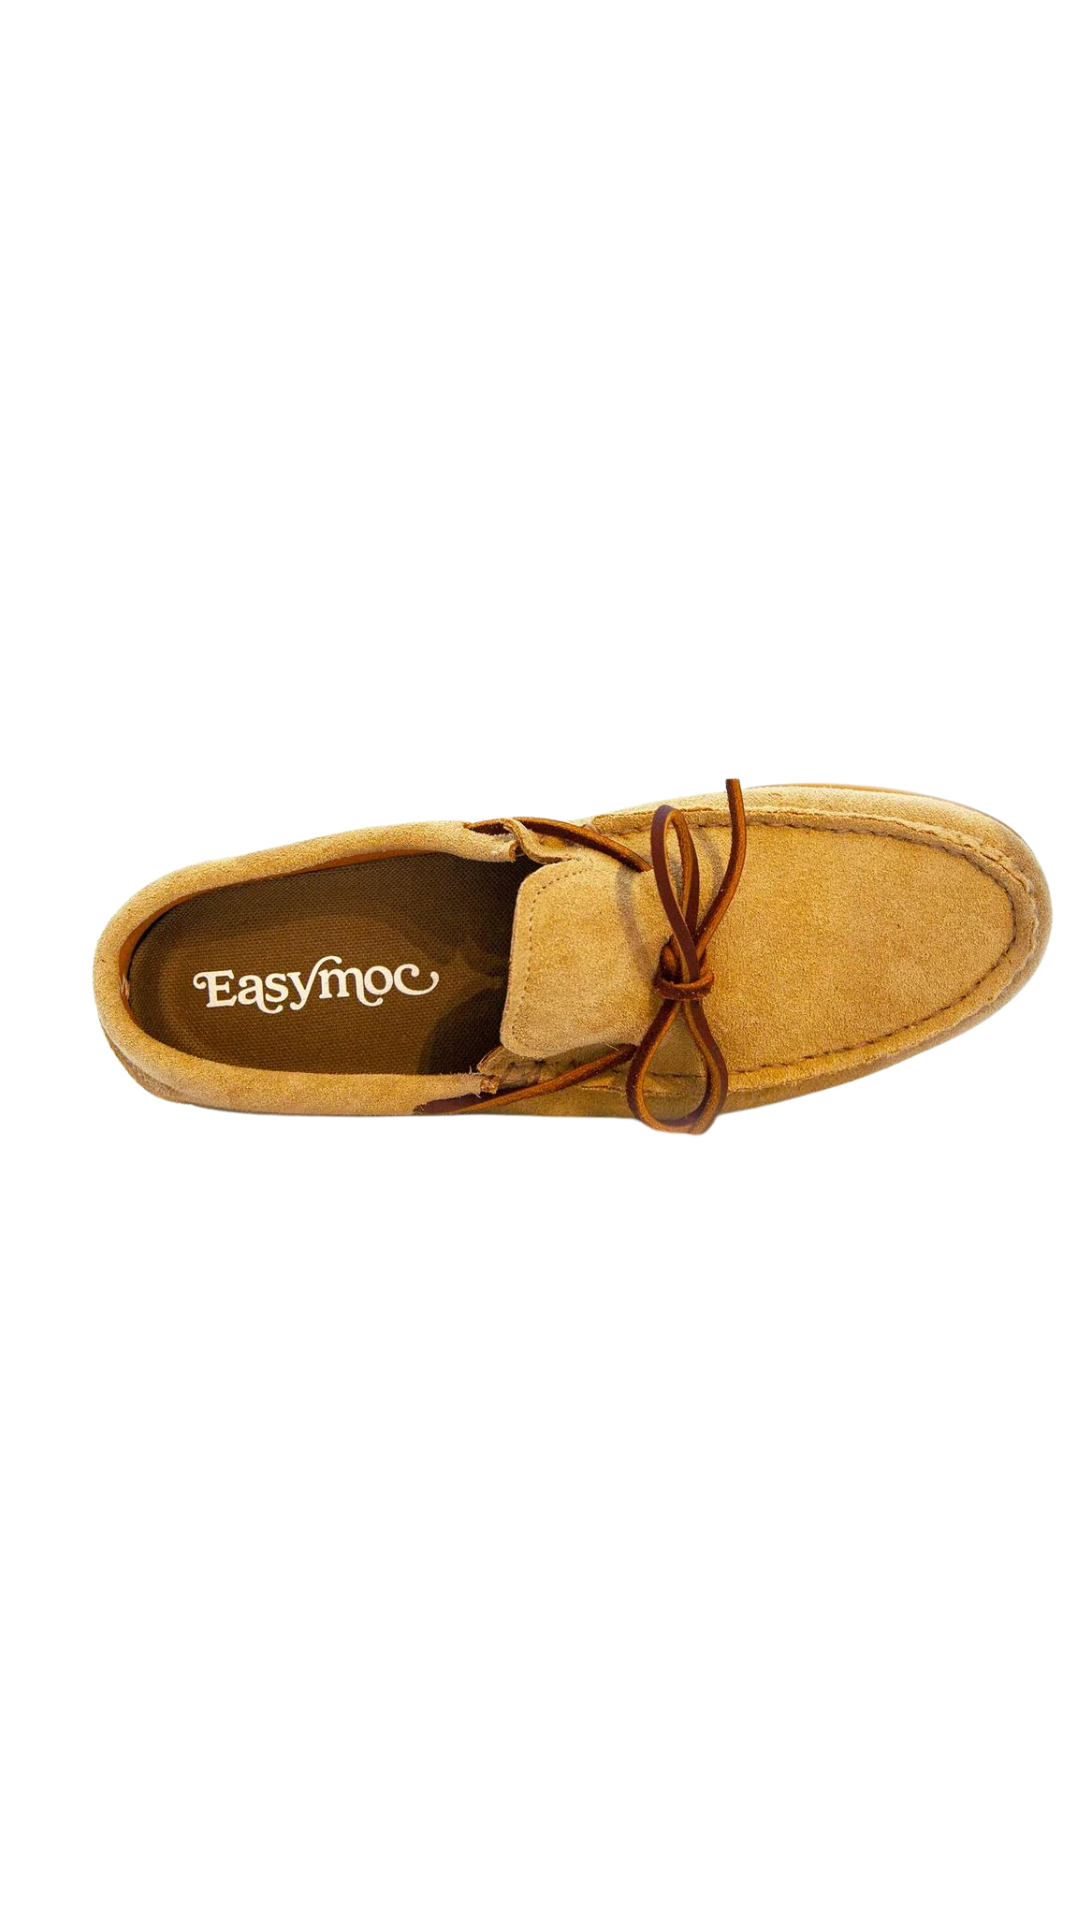 Easymoc - Lace Sand Suede